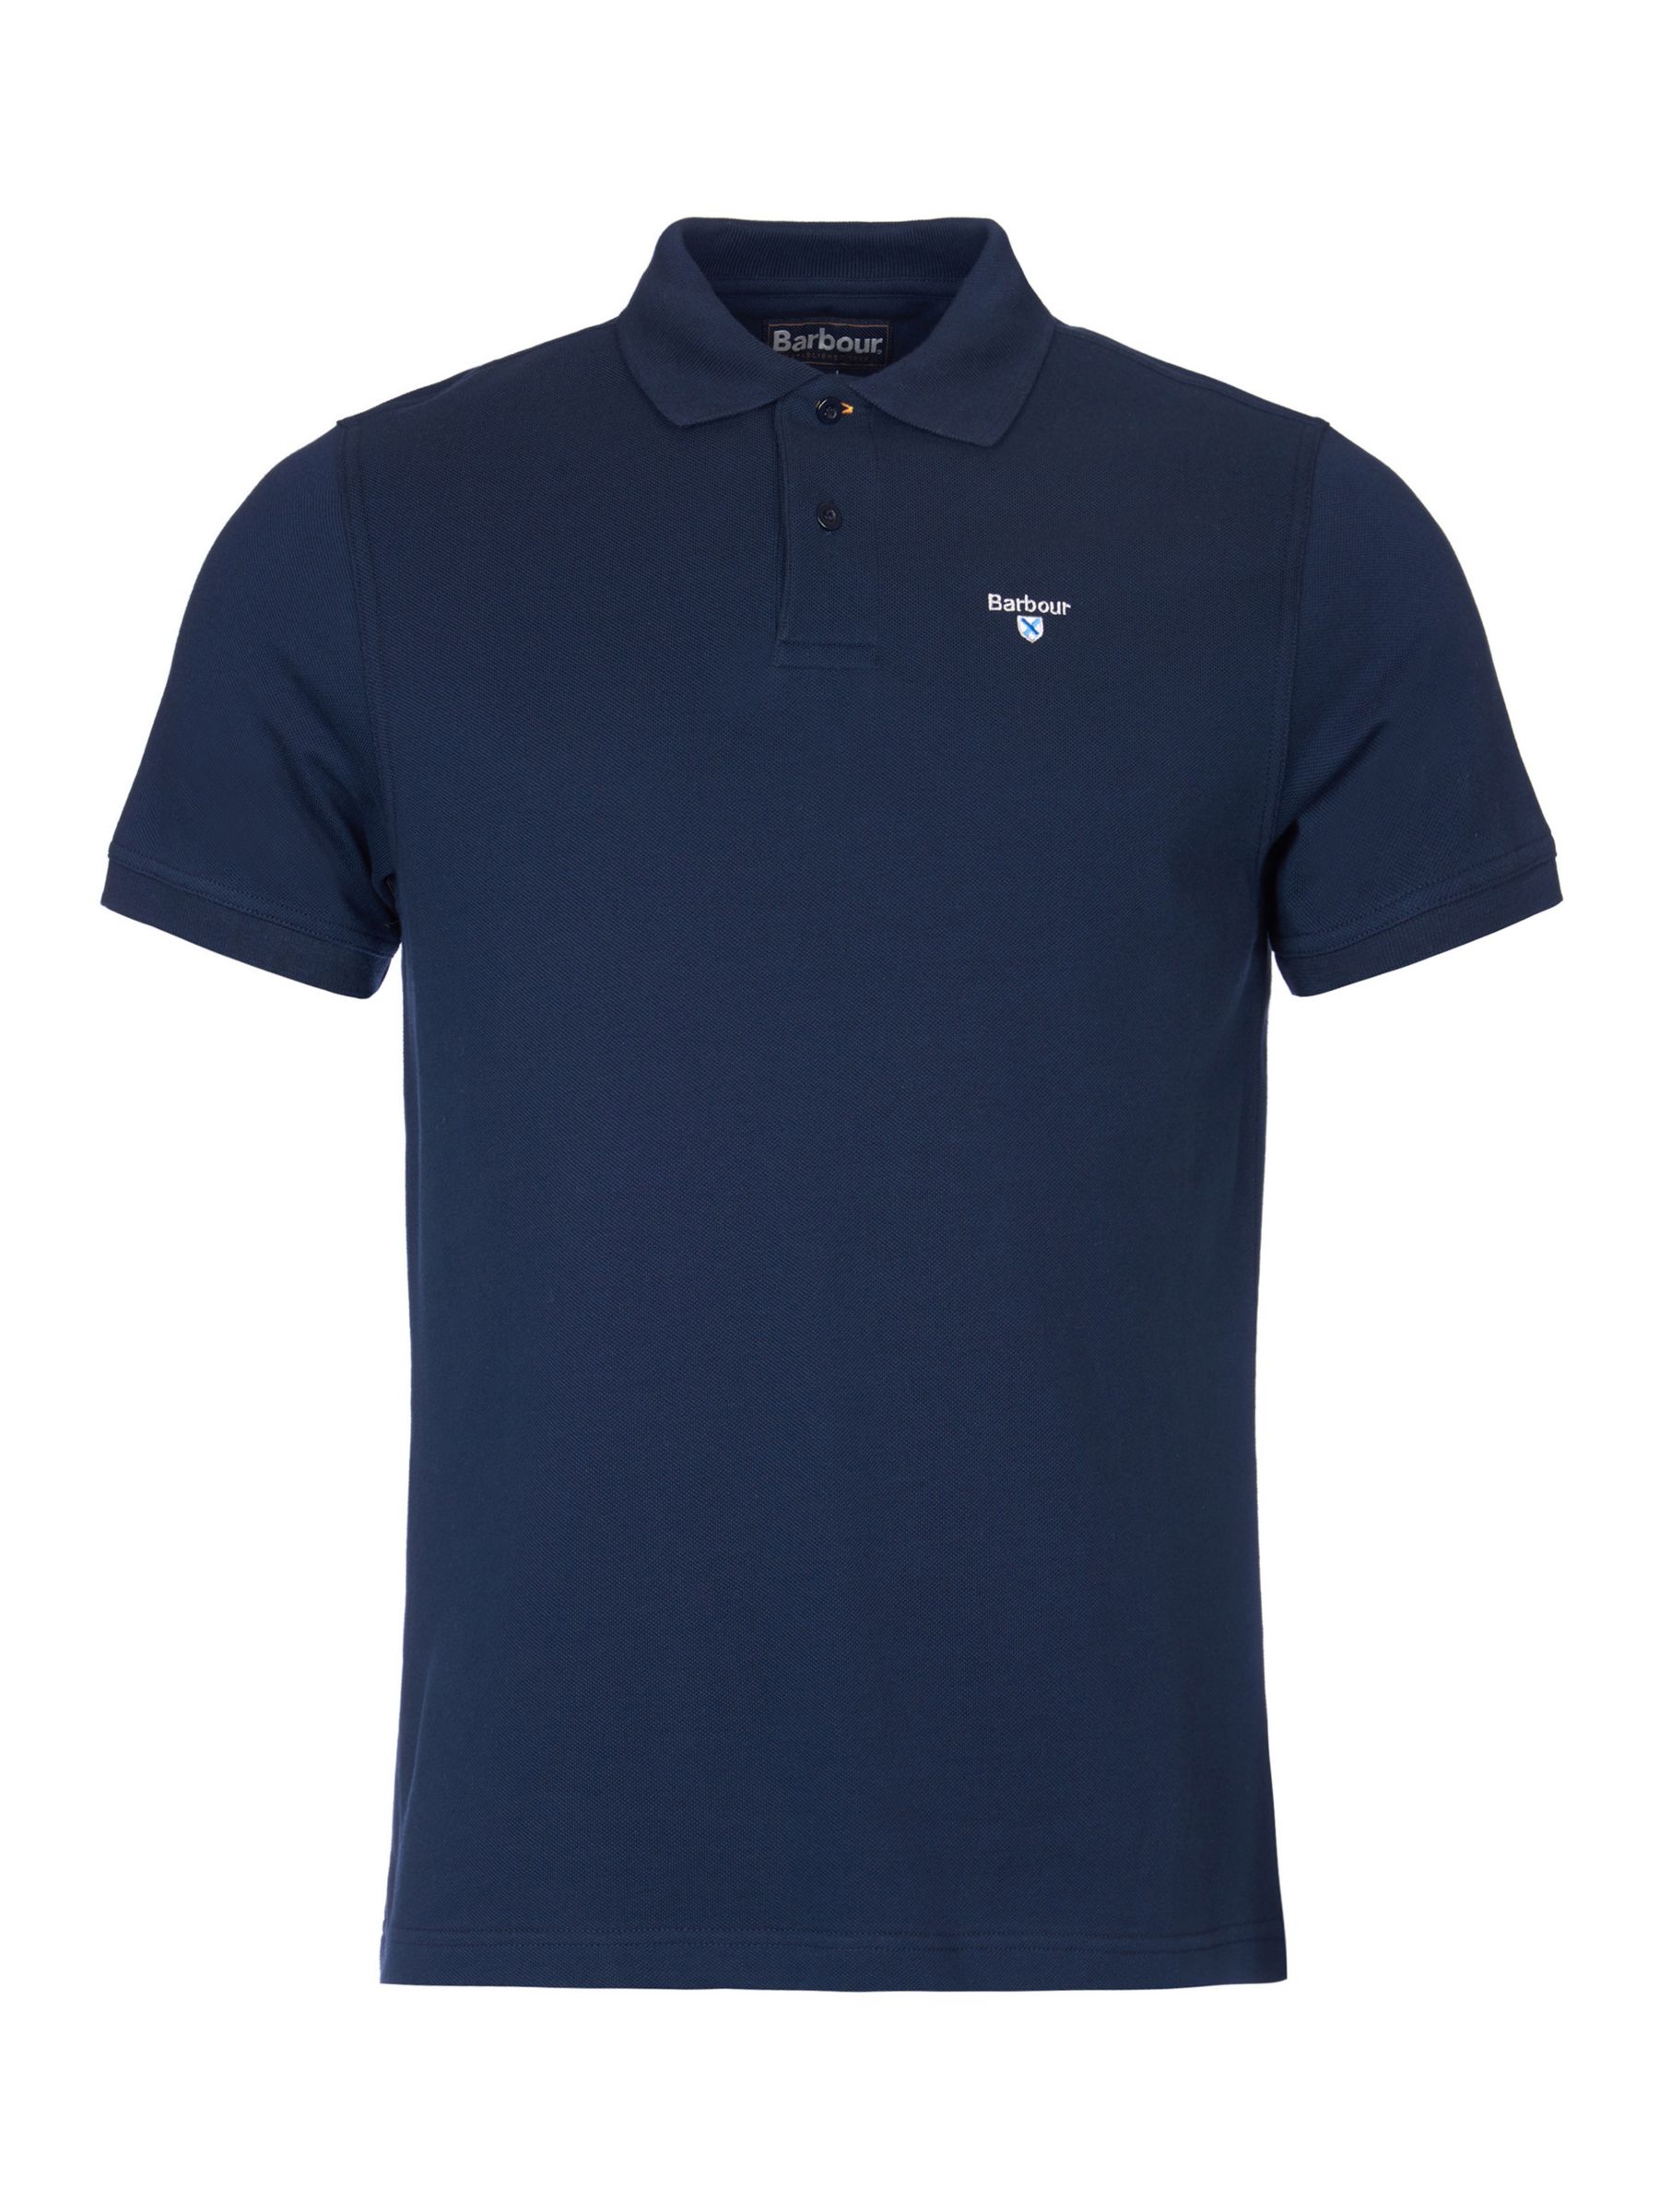 Barbour Short Sleeve Sports Polo Shirt, New Navy at John Lewis & Partners